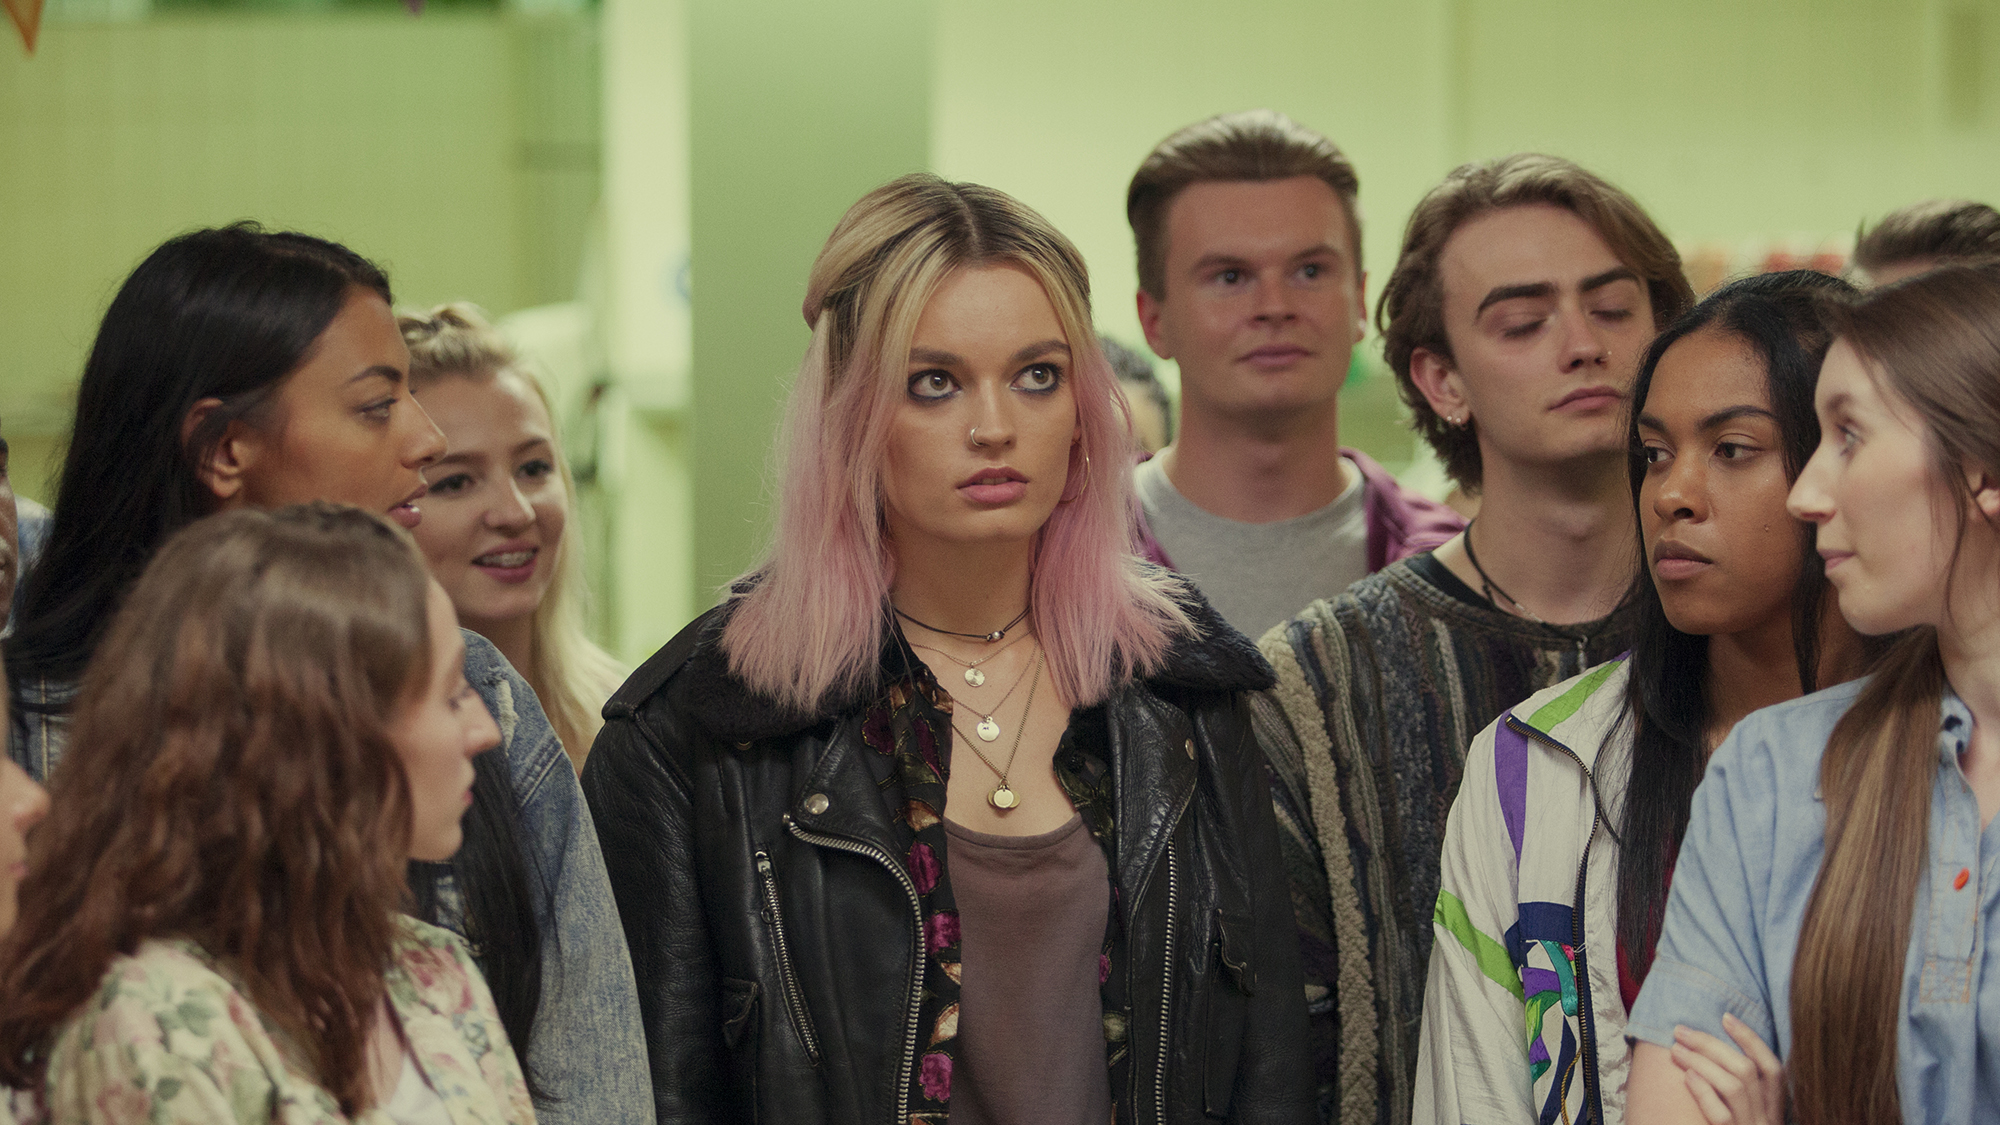 Emma Mackie as Maeve, surrounded by her peers, in sex education